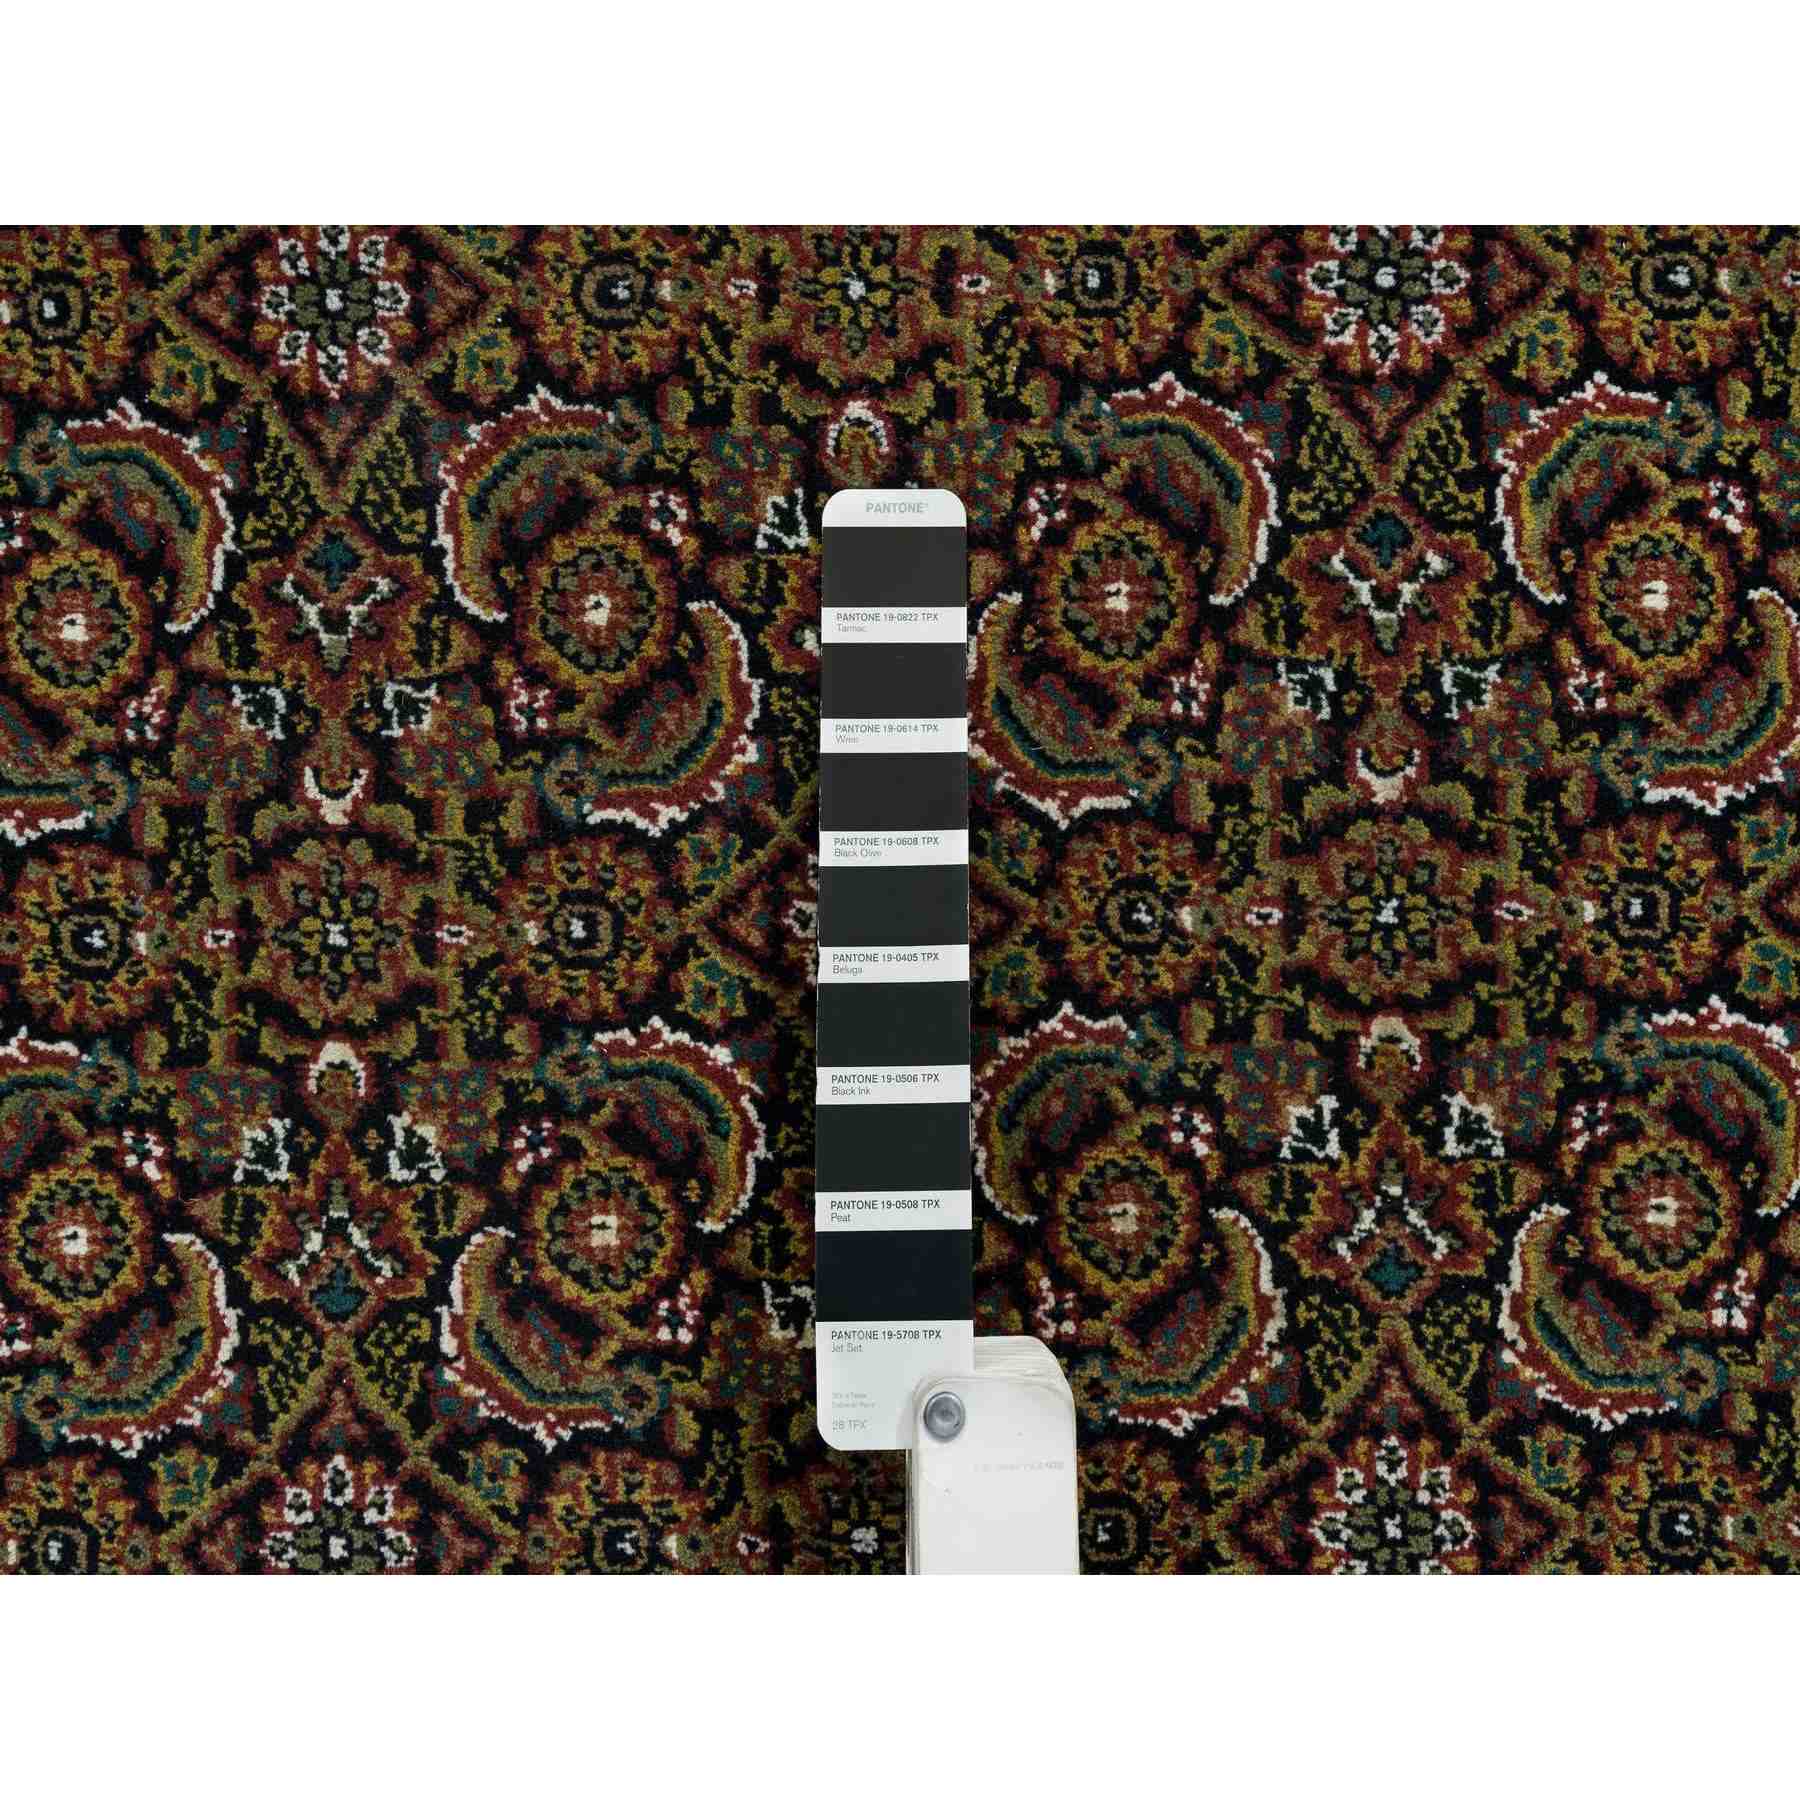 Fine-Oriental-Hand-Knotted-Rug-325610